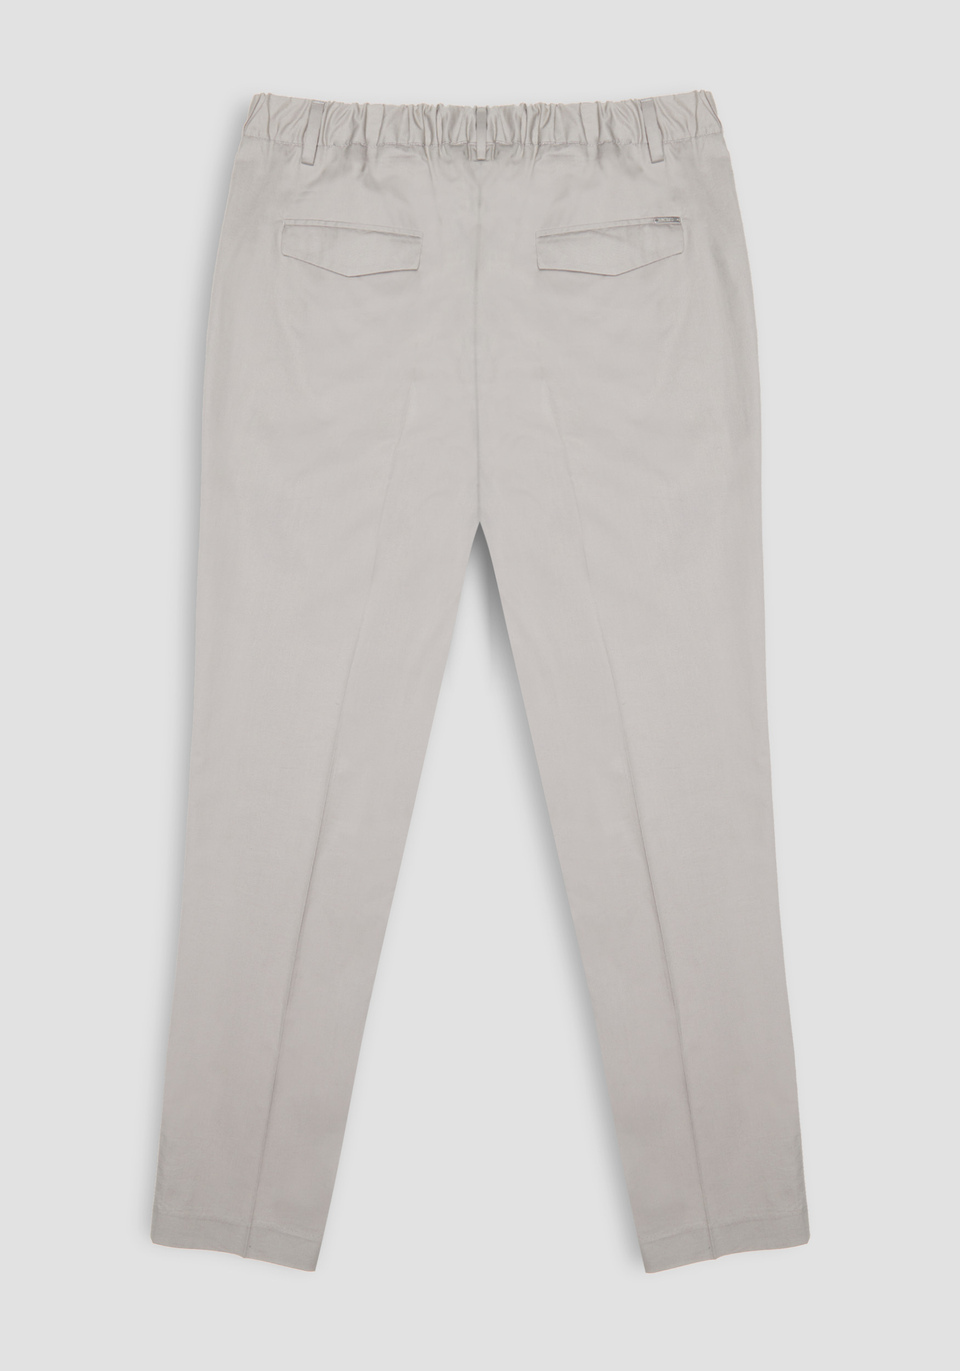 “GUSTAF” CARROT-FIT PURE COTTON TROUSERS WITH DRAWSTRING - Antony Morato Online Shop